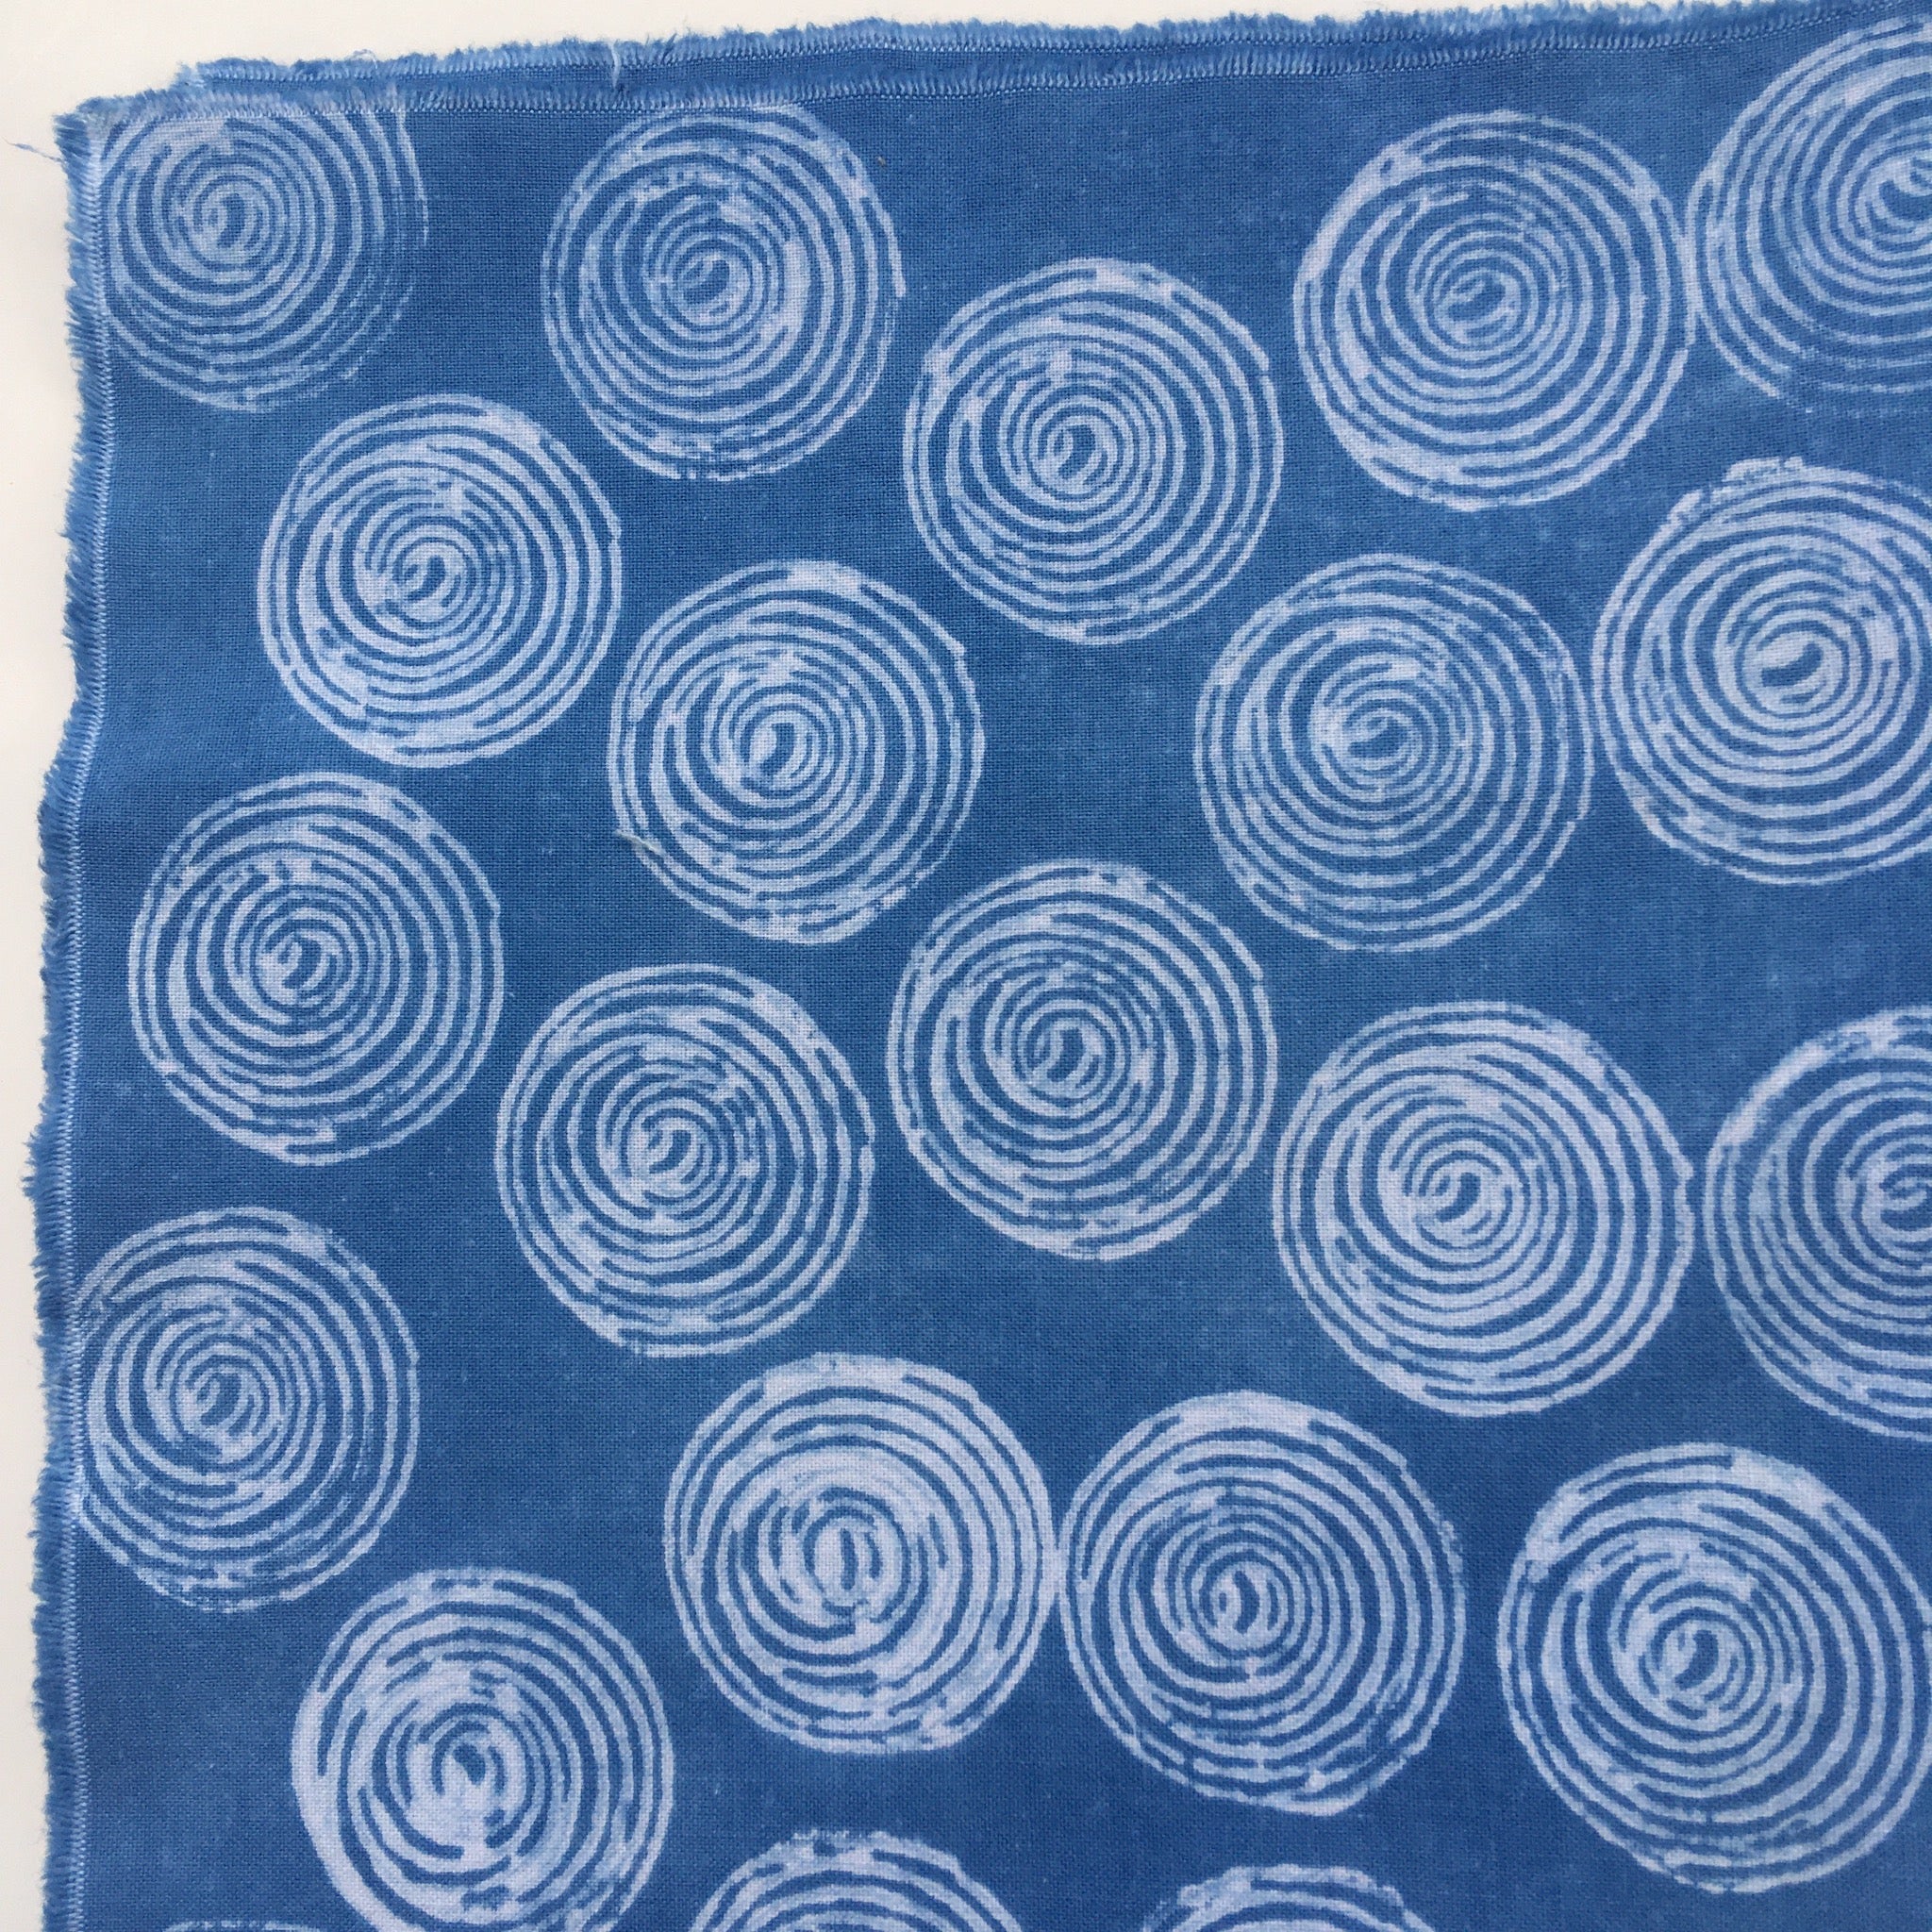 Fabric example dyed with clay resist: deep indigo blue with circular pattern in white.